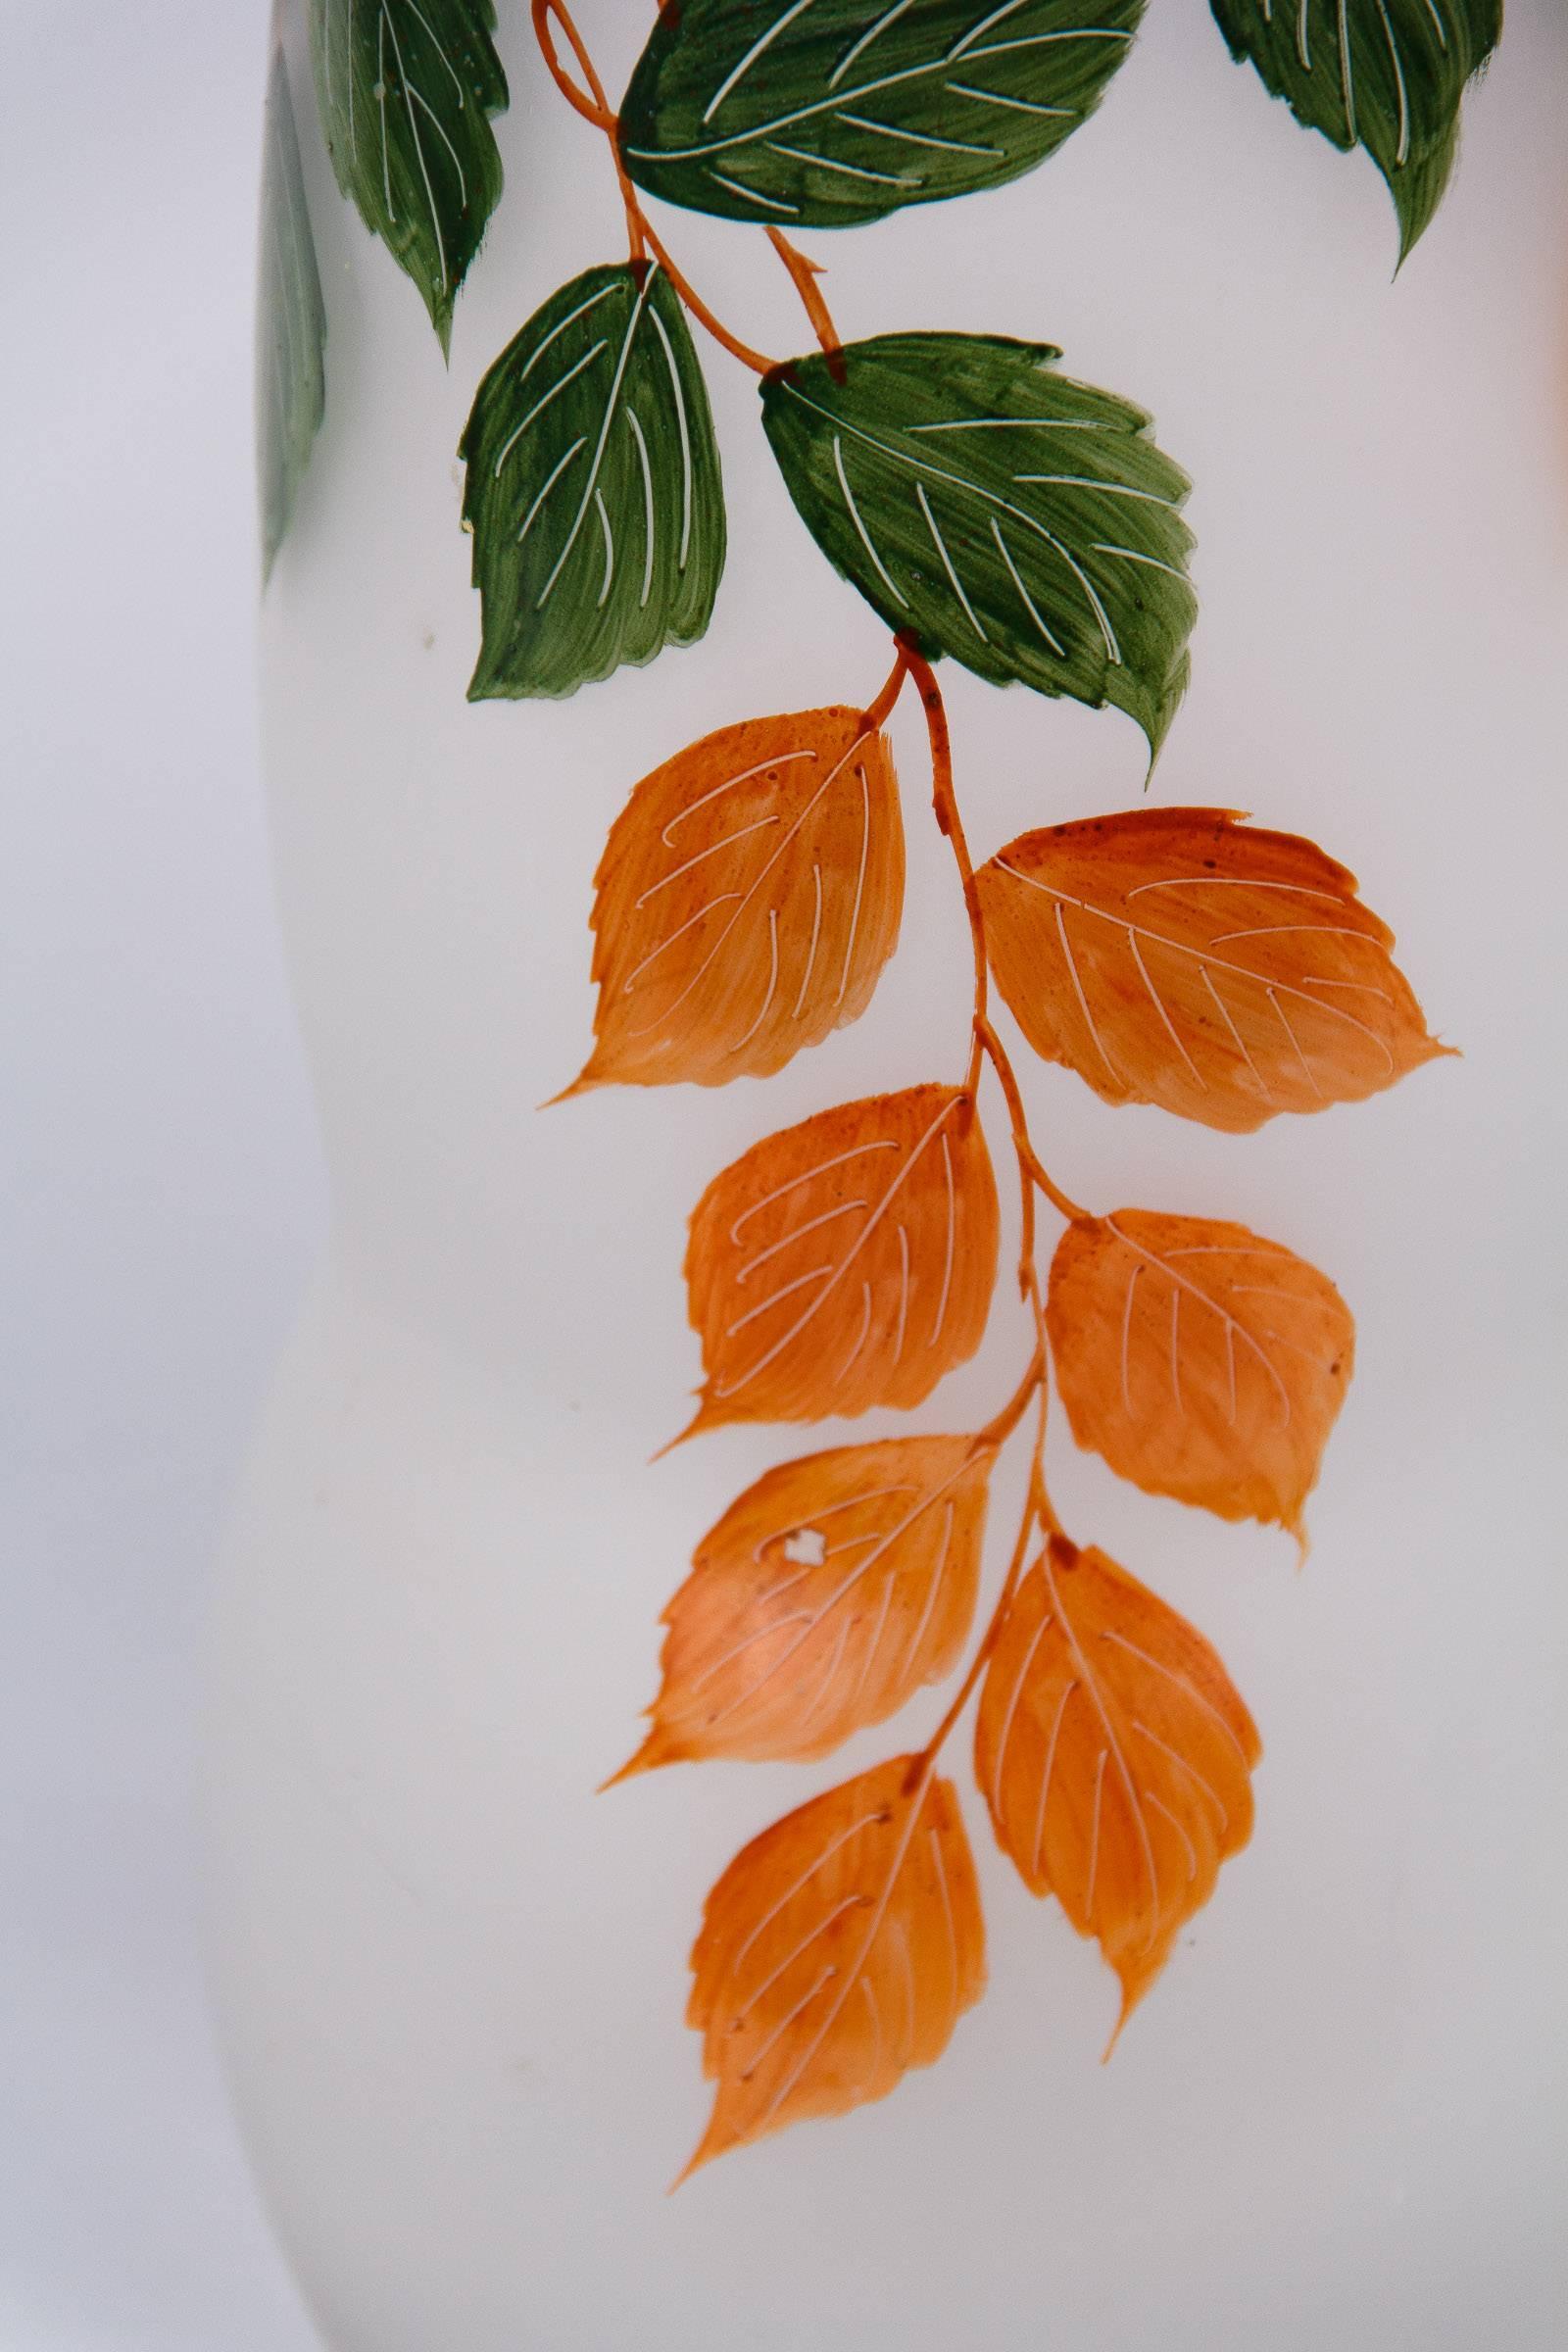 20th Century French Frosted Glass Vase with Hand Painted Foliage Motifs, 1900s For Sale